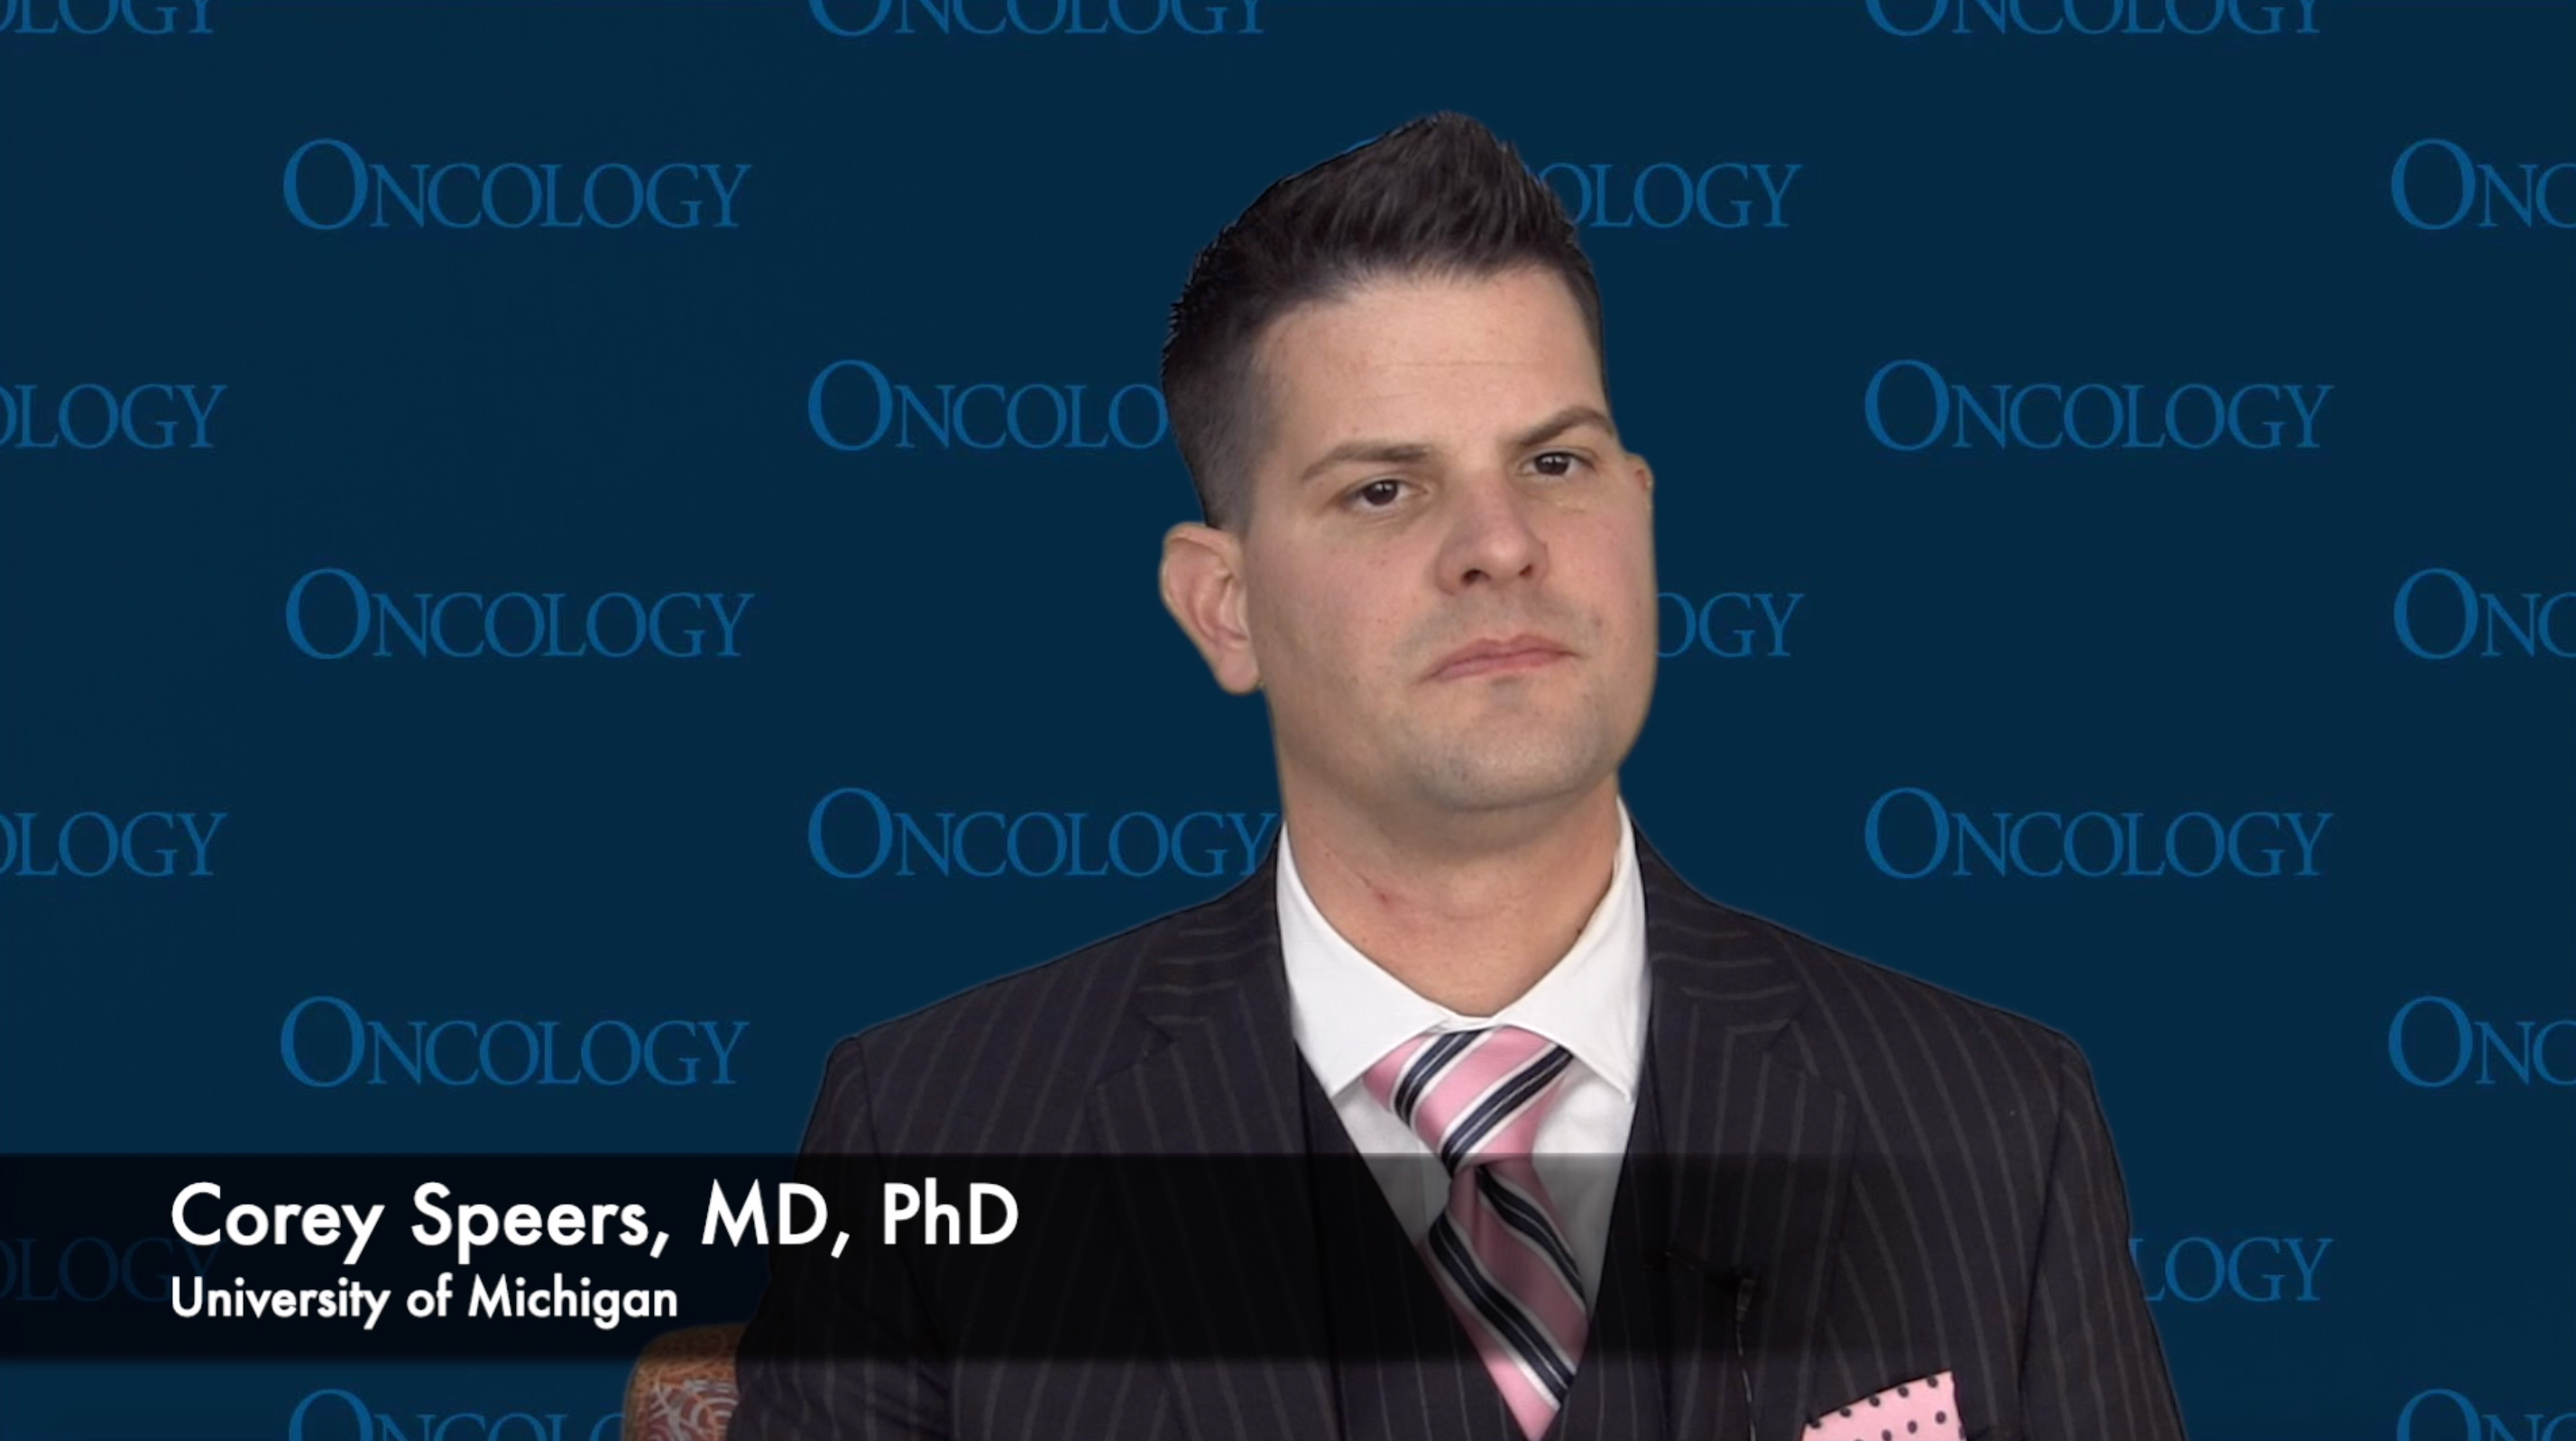 Corey Speers, MD, PhD, Discusses Personalized Radiation Treatment and Genomic Signatures